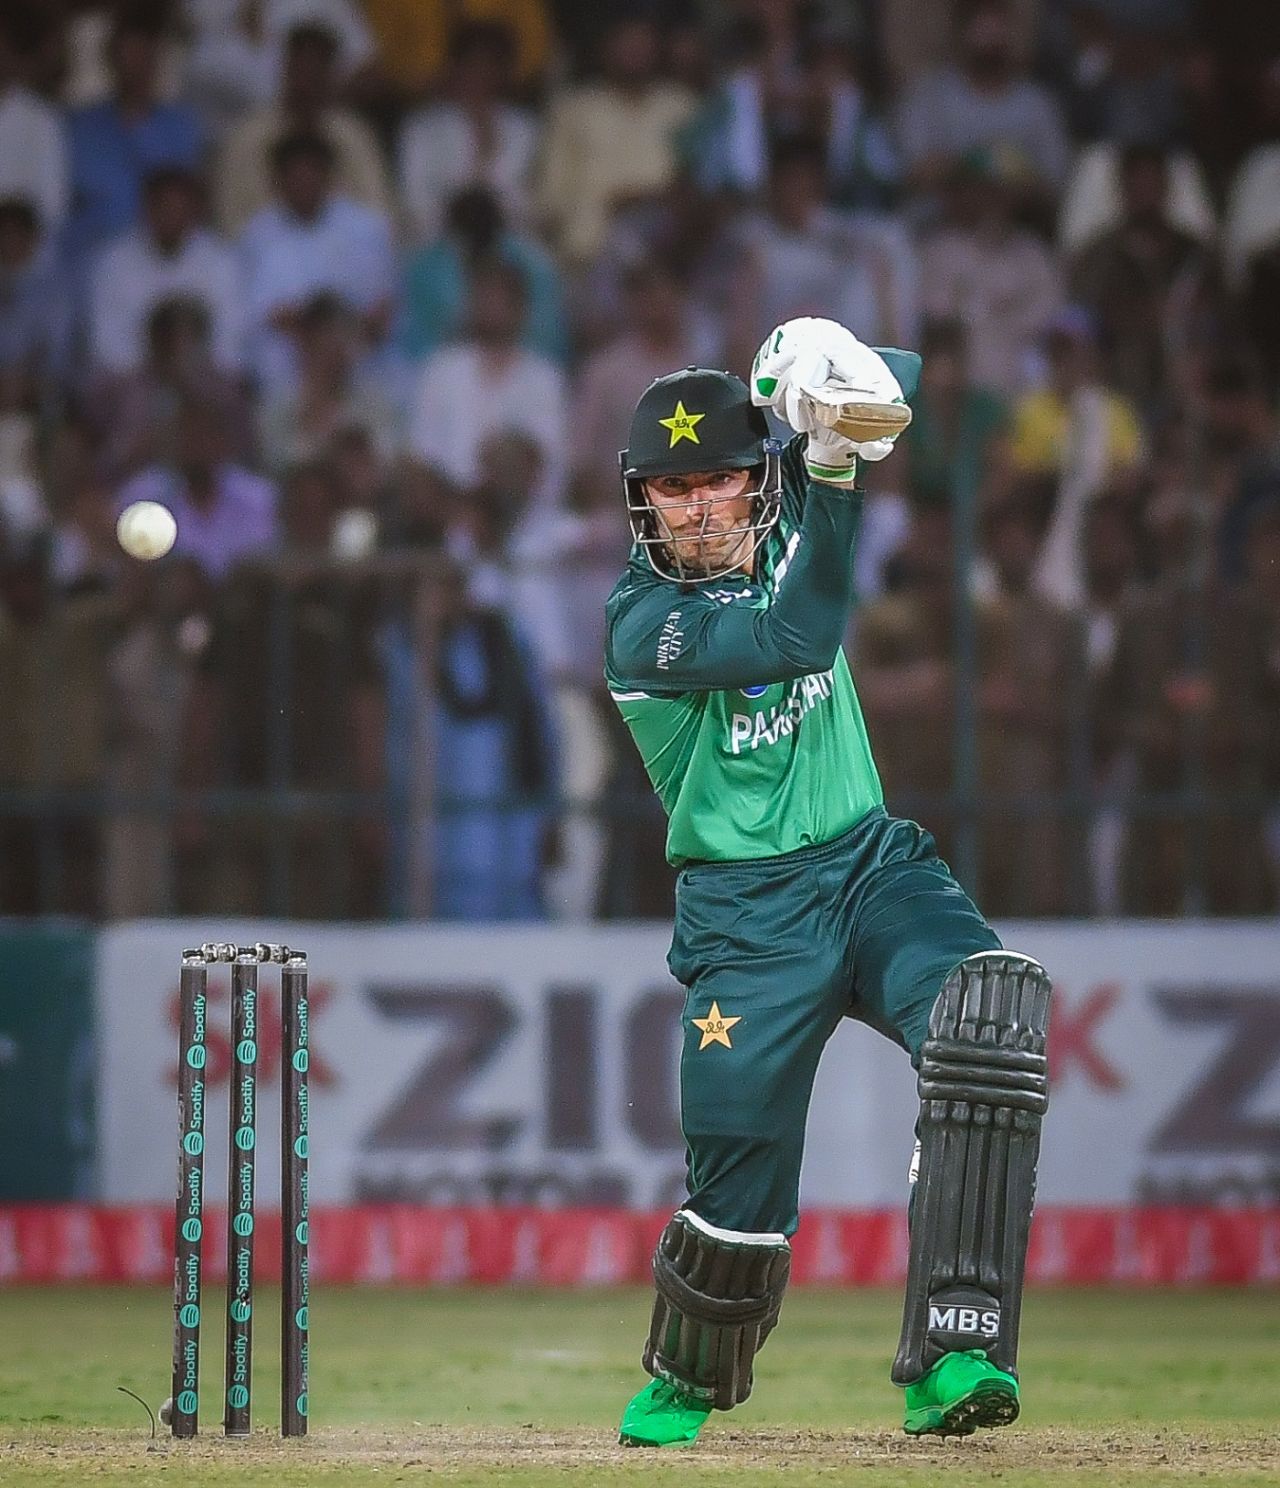 Mohammad Wasim hit some crucial blows down the order, Pakistan vs West Indies, 2nd ODI, Multan, June 10, 2022